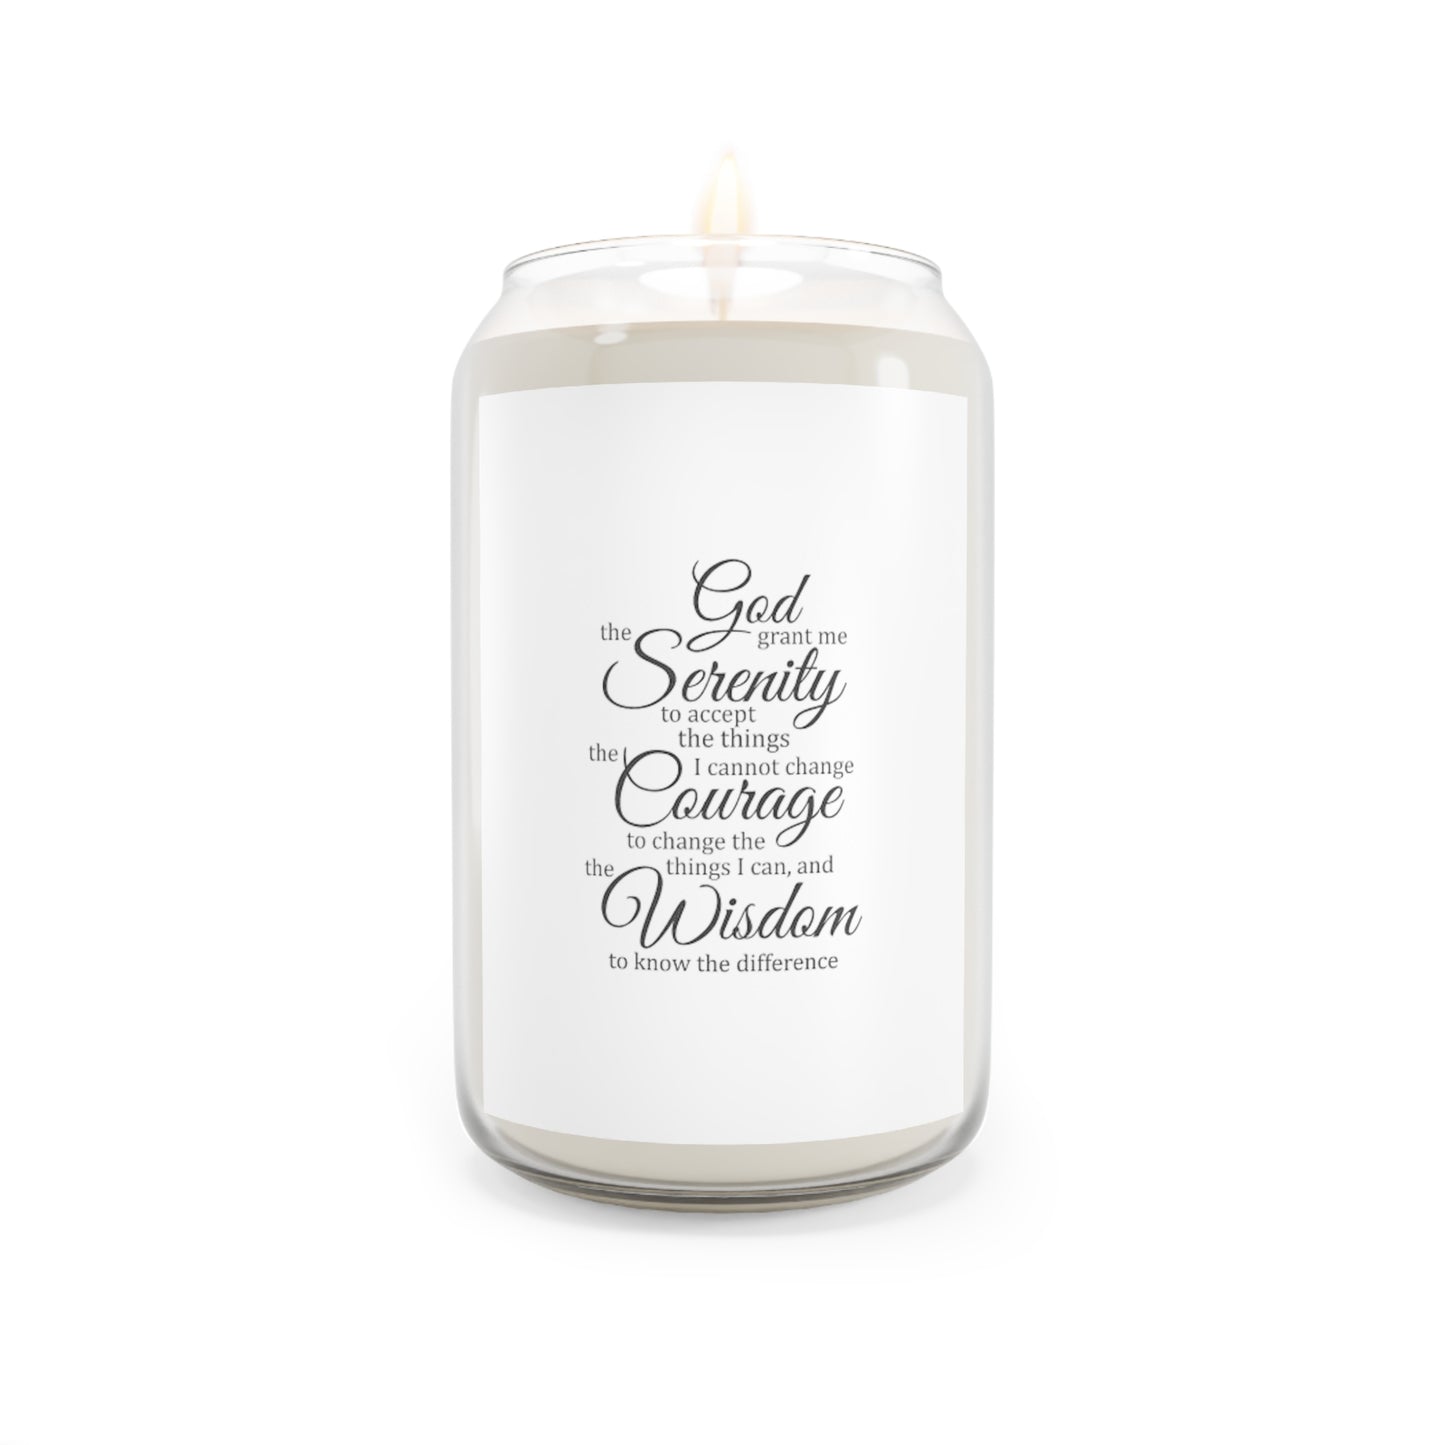 Serenity Prayer Scented Candle 13.75oz